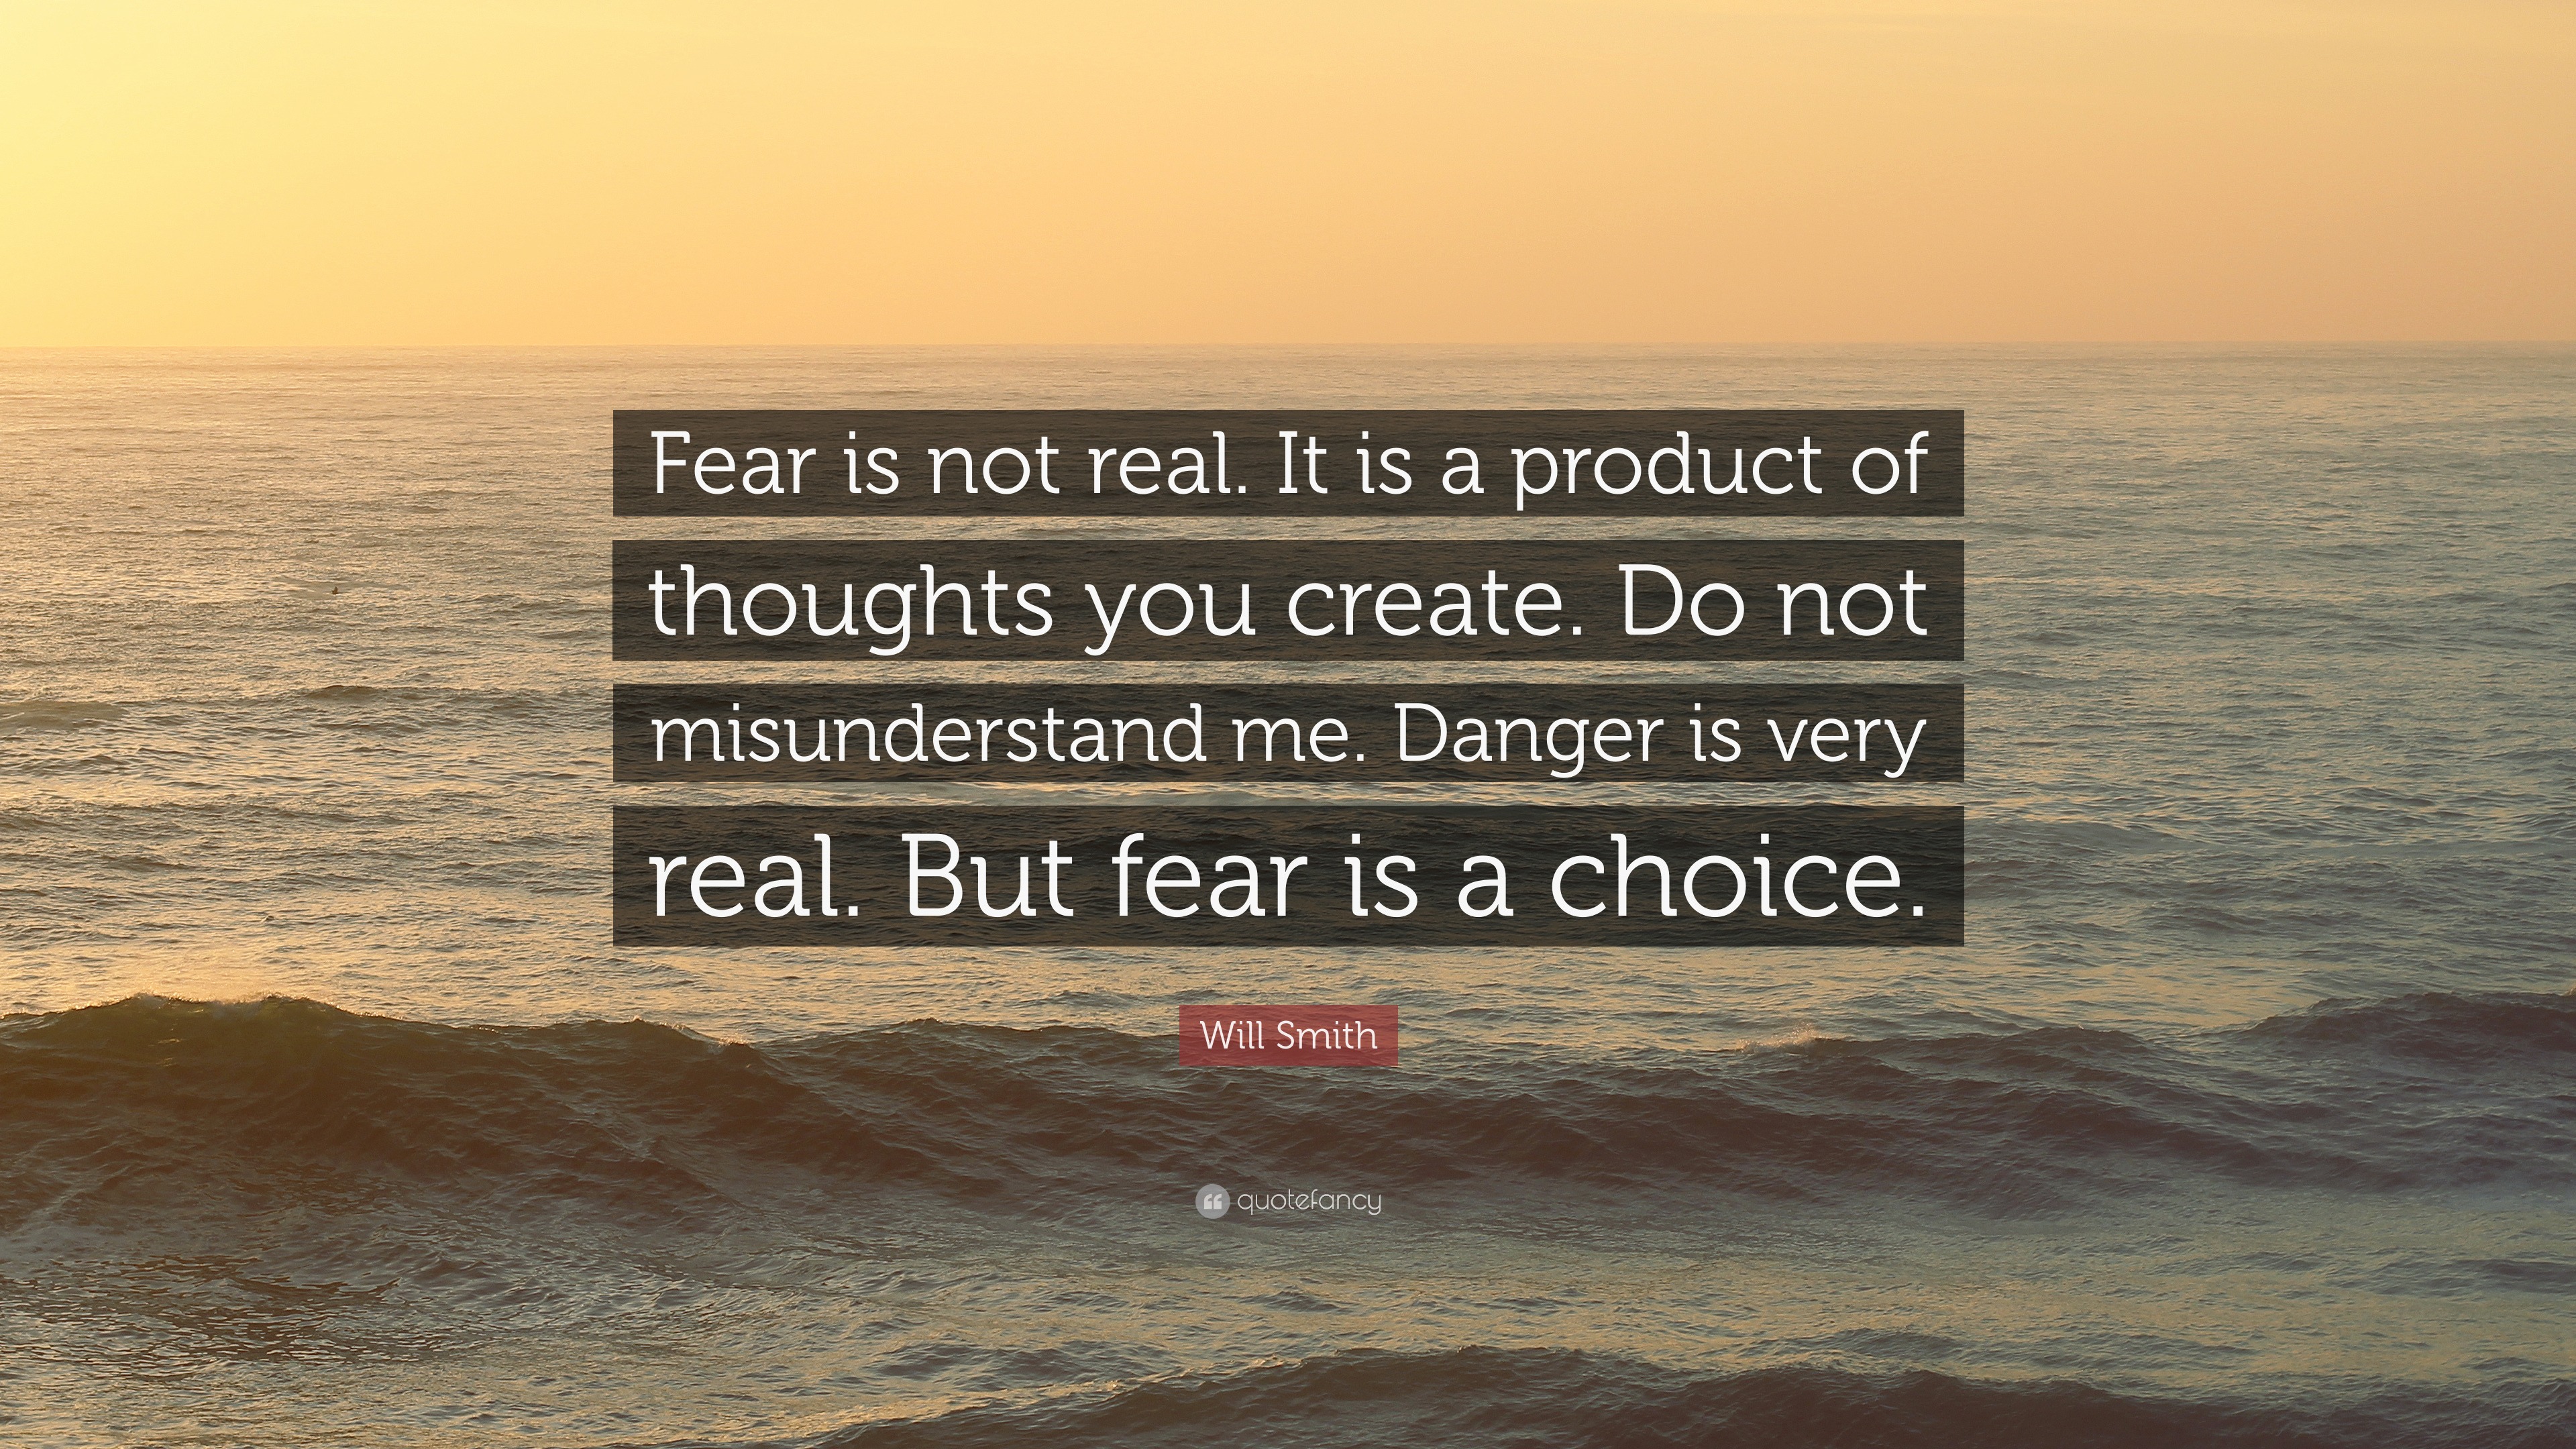 Personal Narrative: Fear Is Not Real